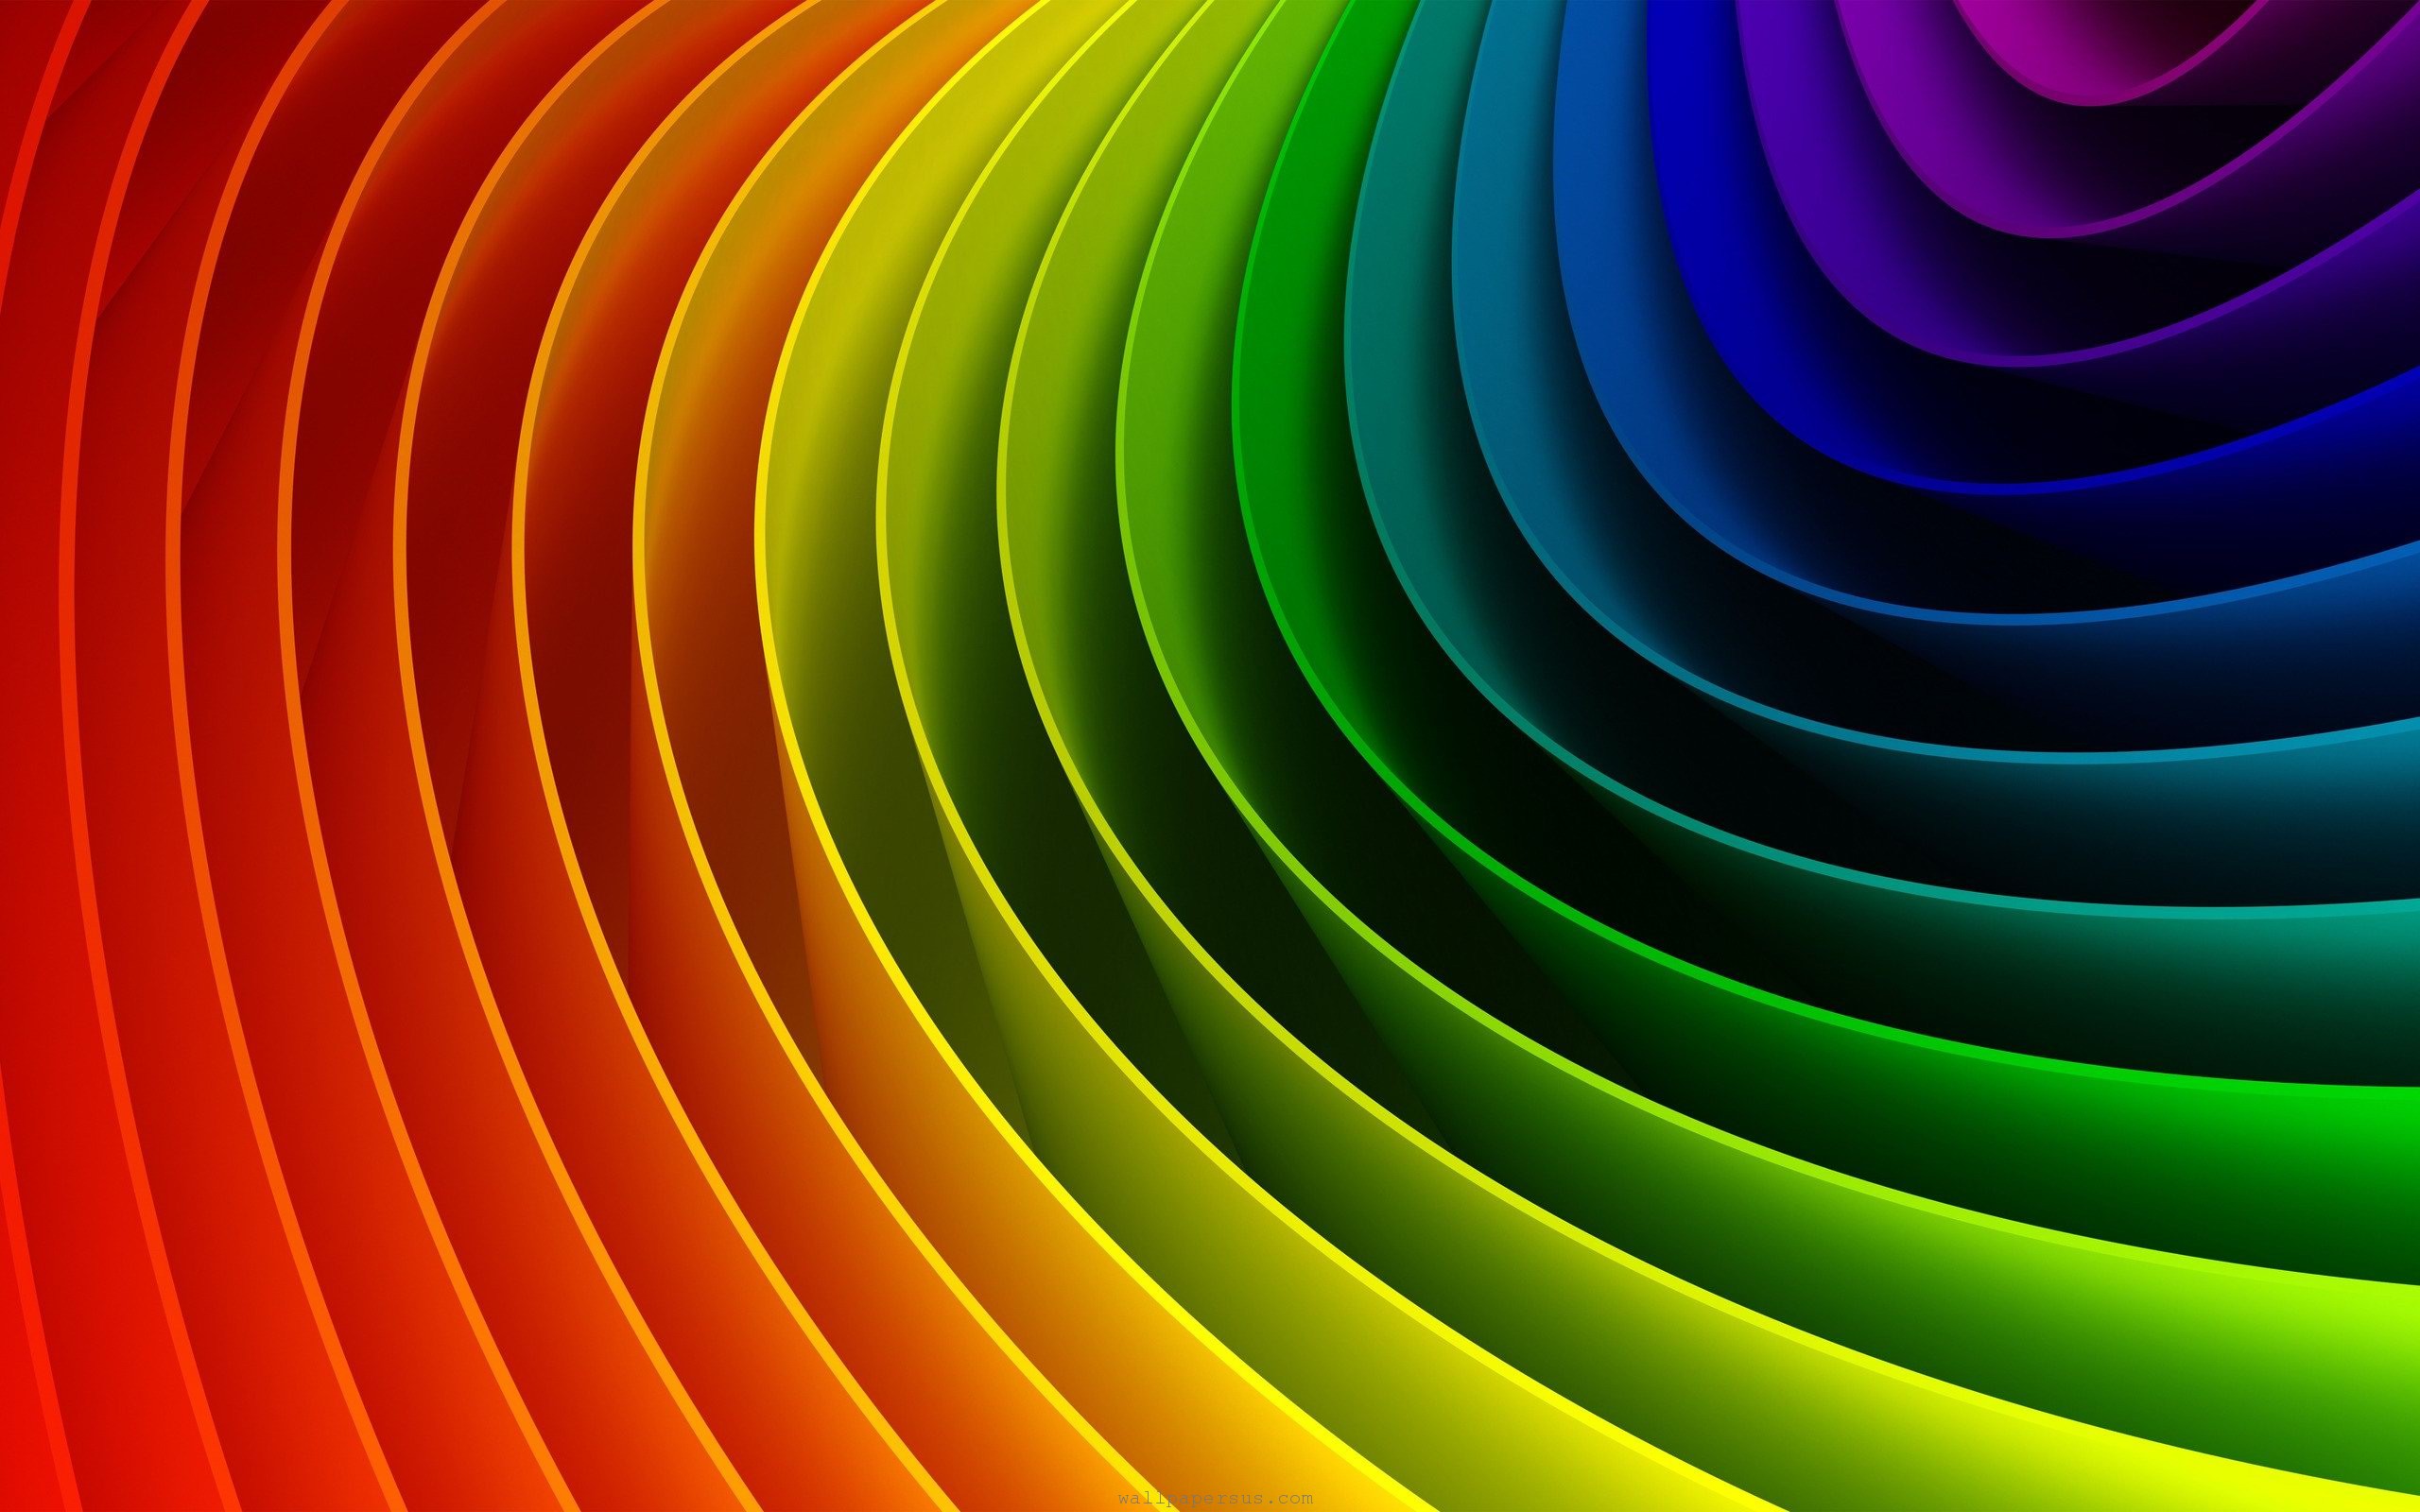 Colorful Abstract Background wallpaper | 2560x1600 | #10135